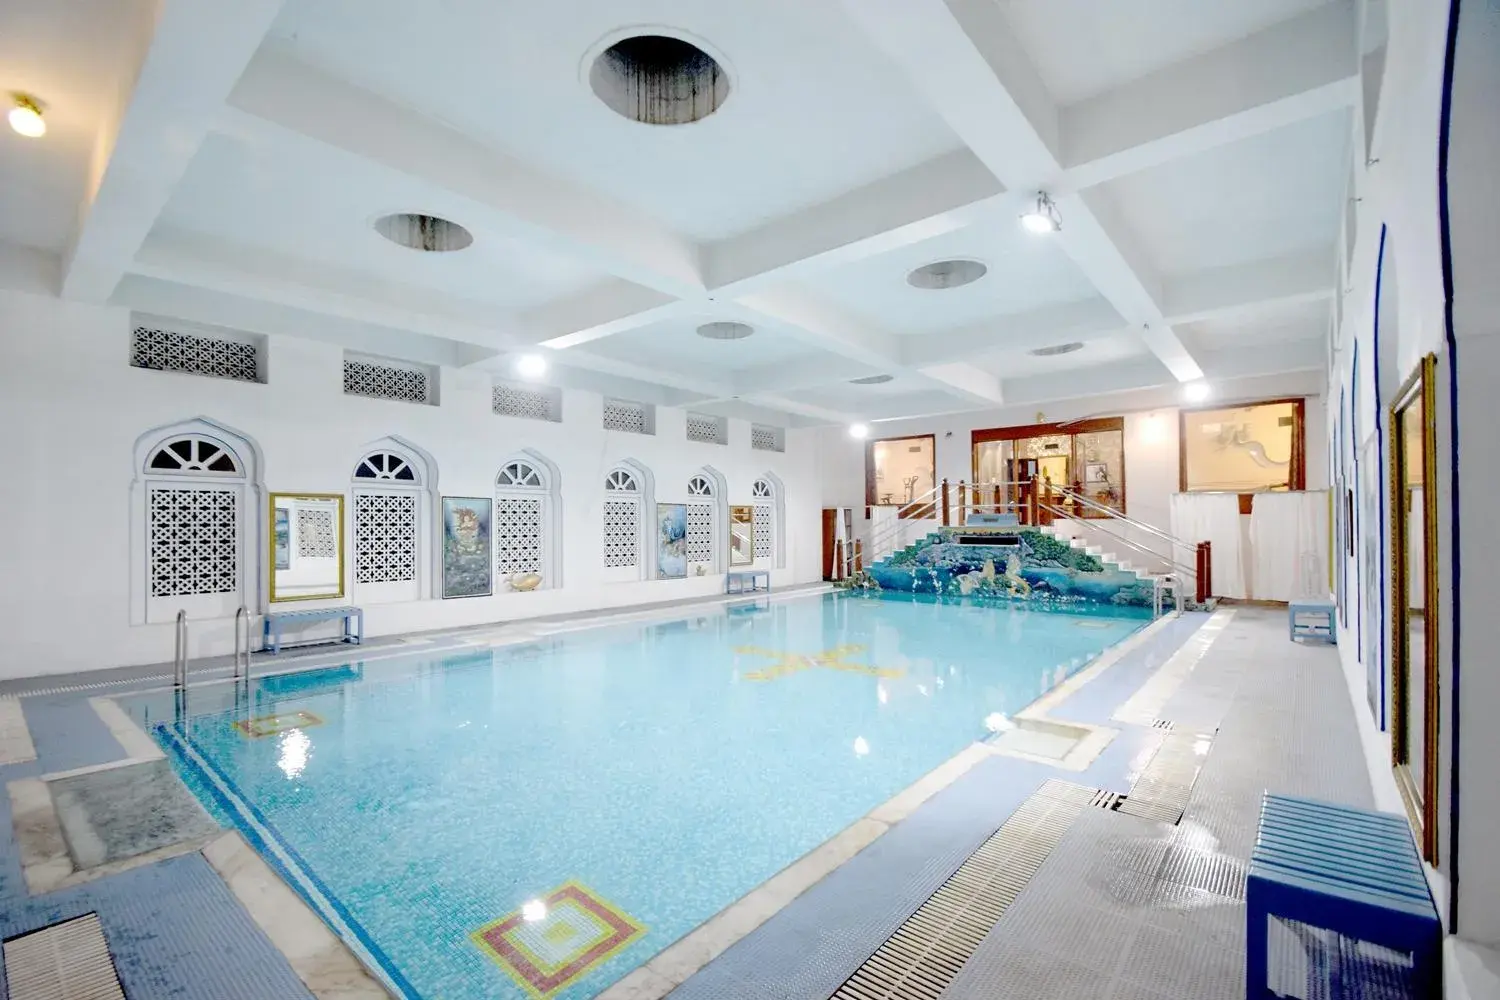 Swimming Pool in Hari Mahal Palace by Pachar Group